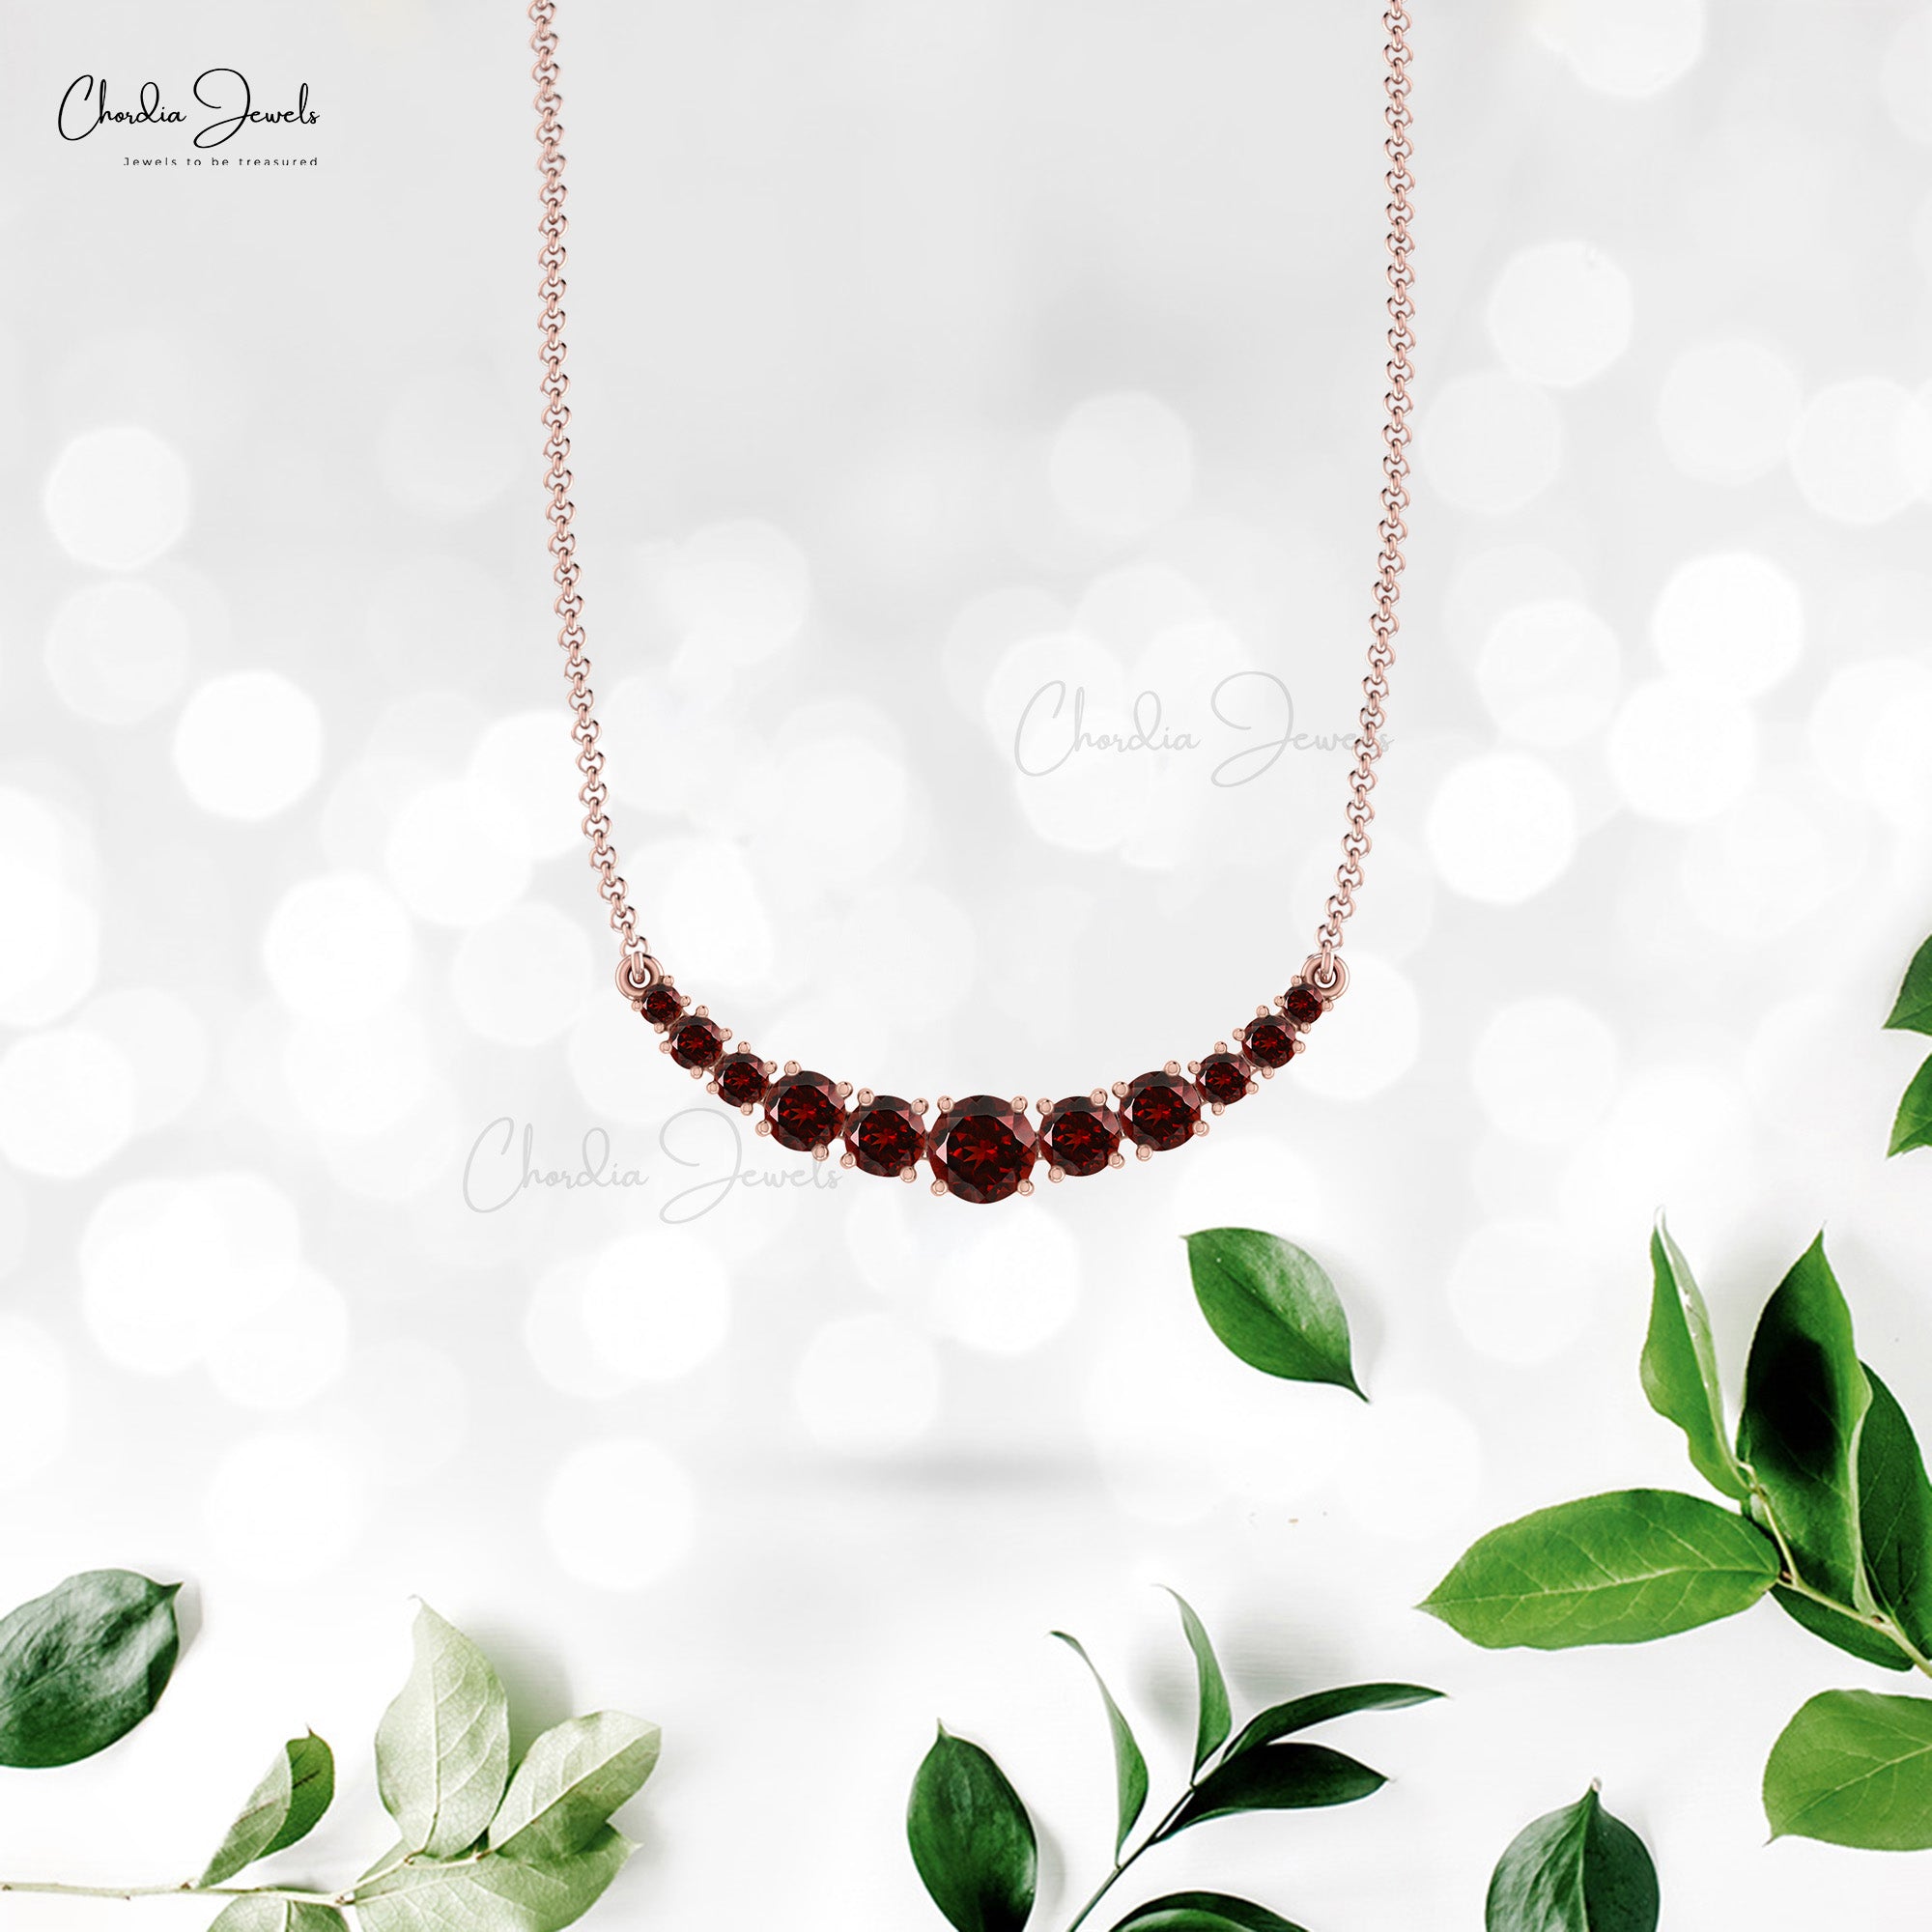 Natural January Birthstone Gold Garnet Necklace in 14k Solid Gold